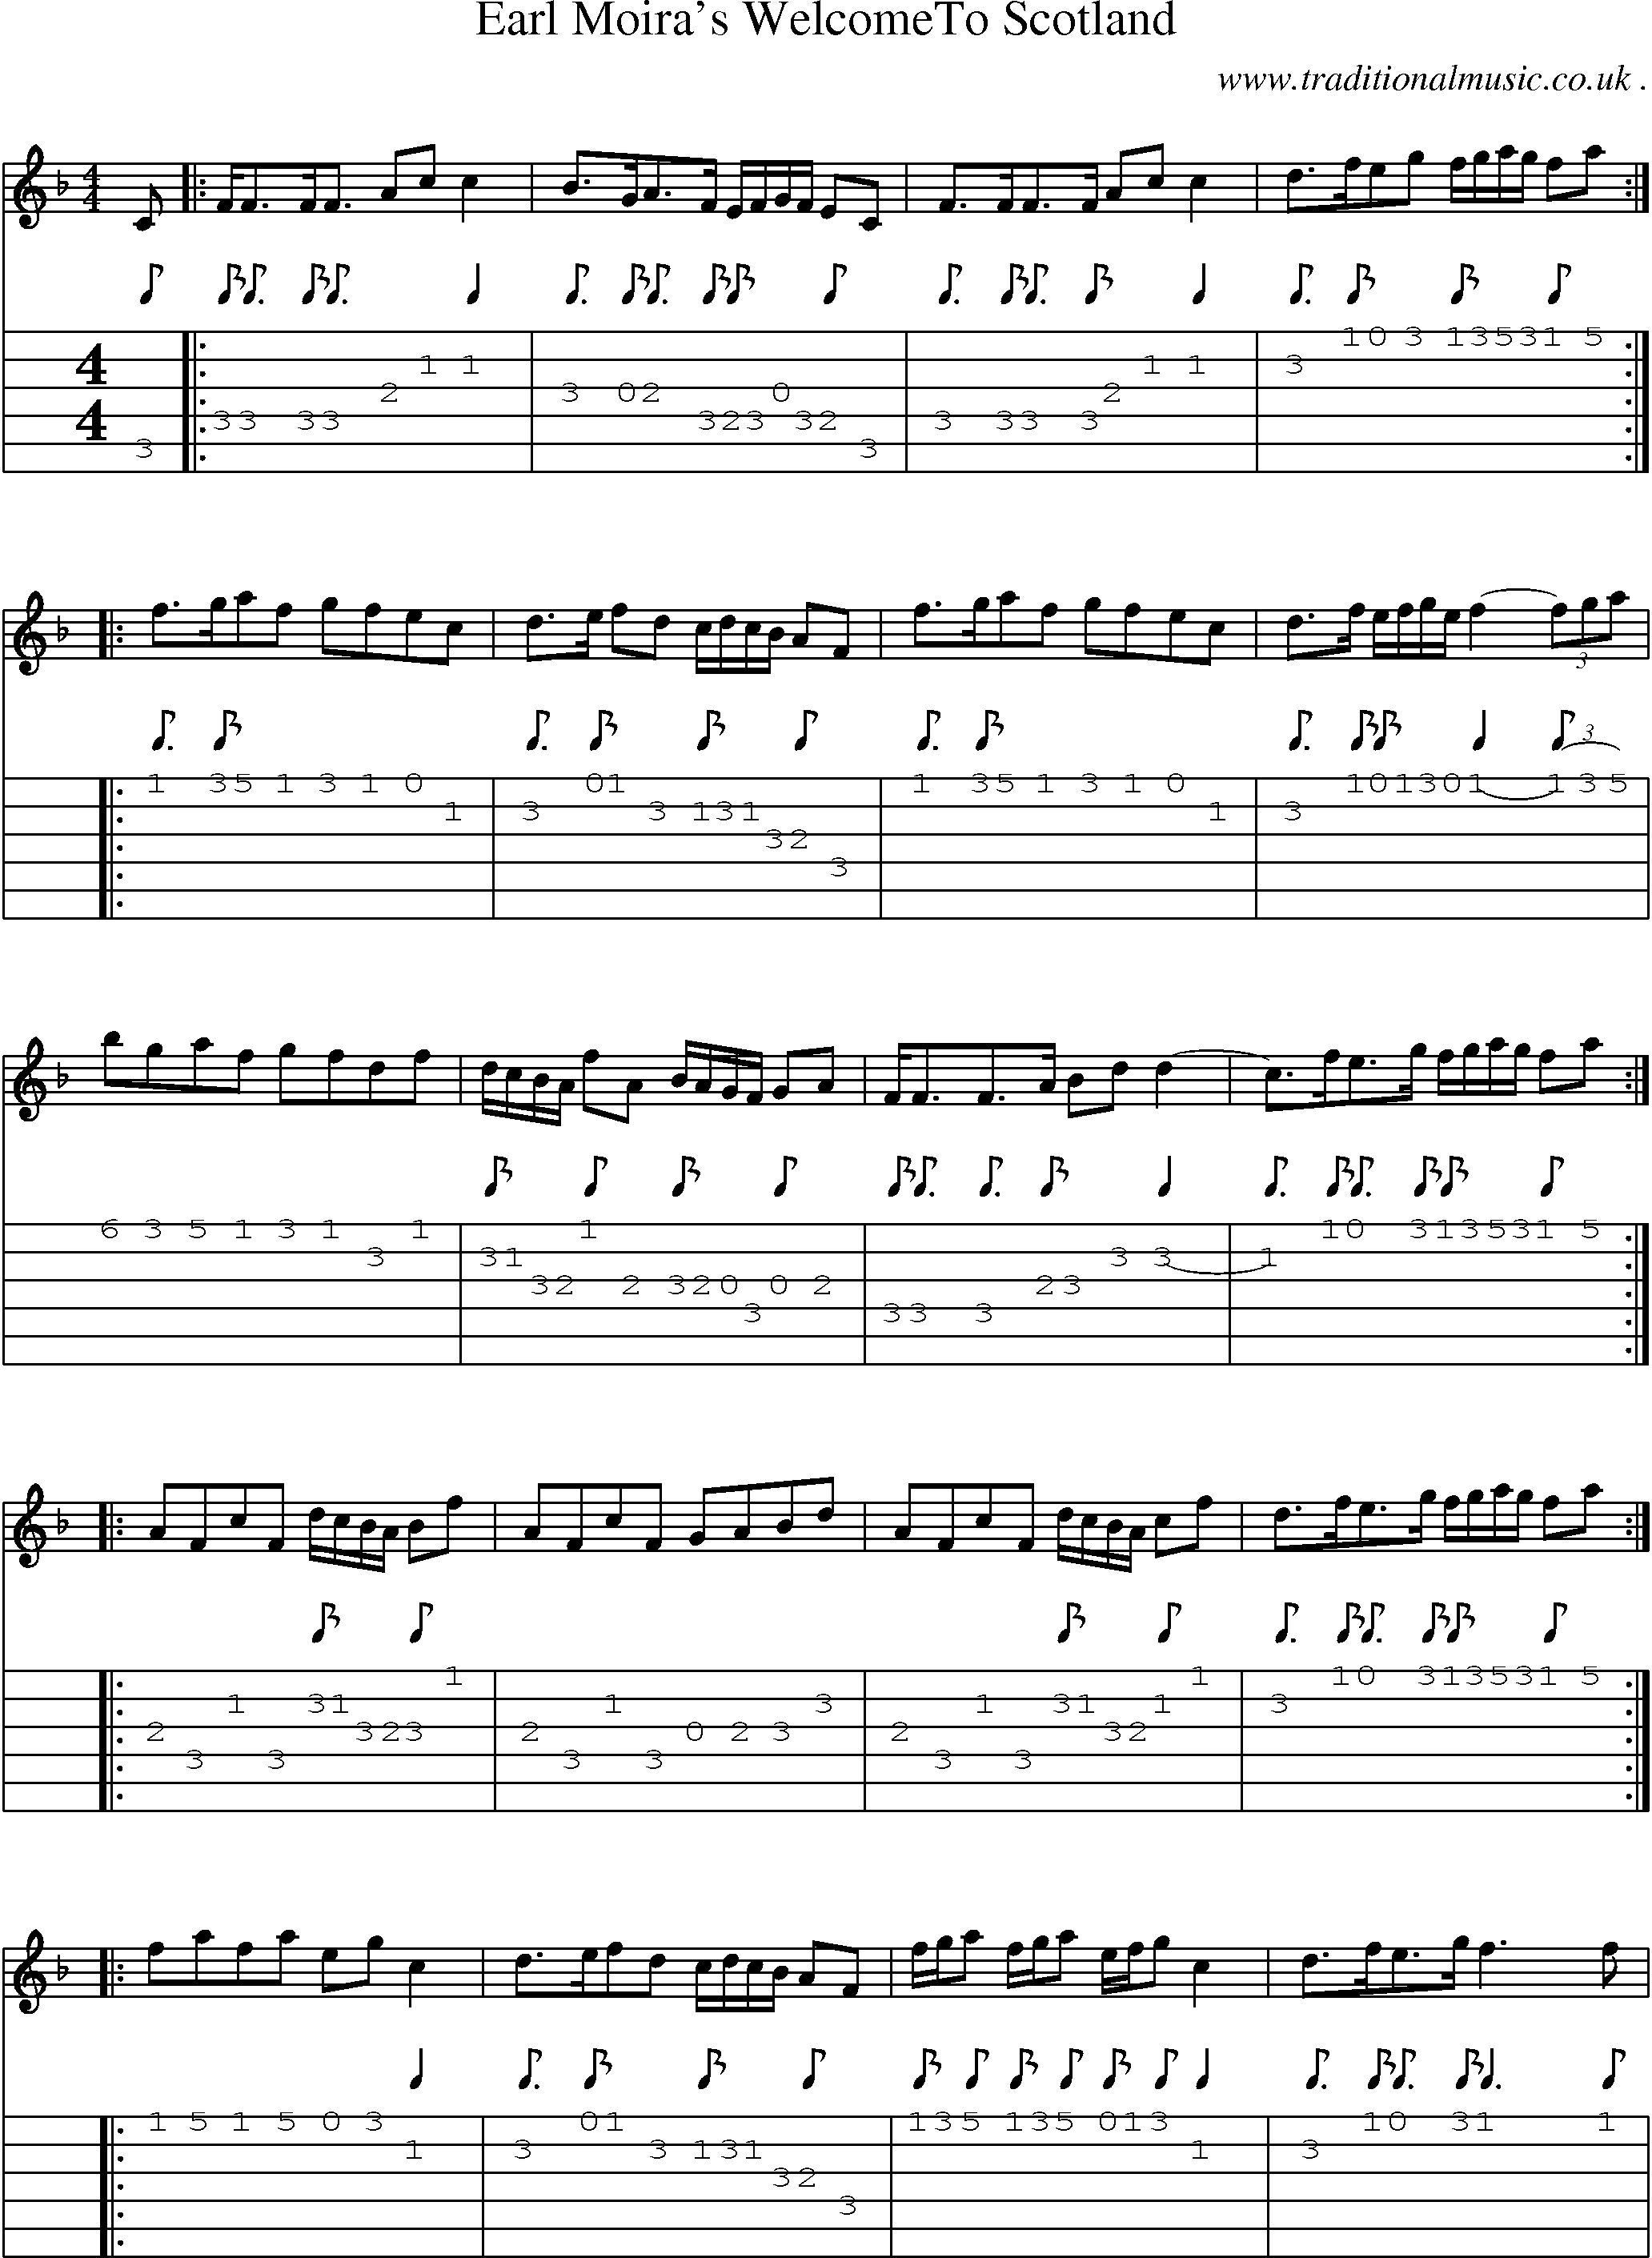 Sheet-Music and Guitar Tabs for Earl Moiras Welcometo Scotland